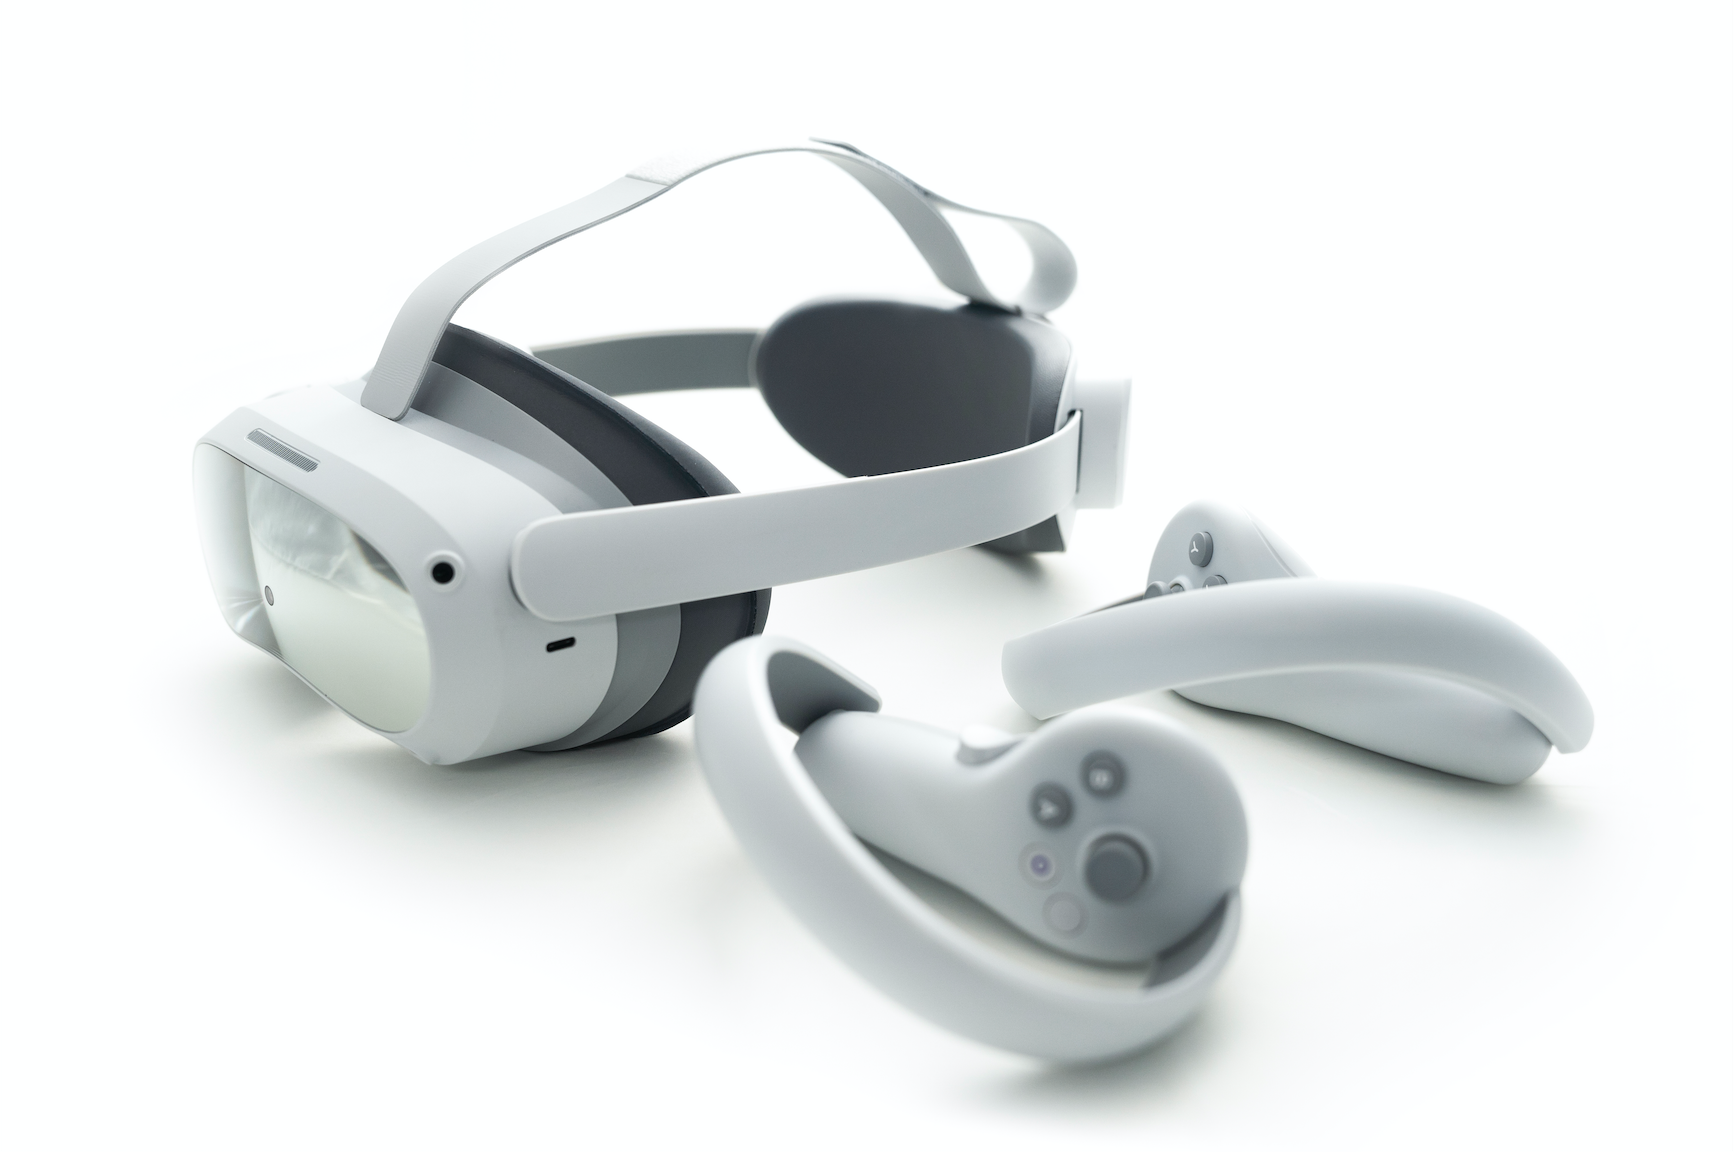 Pico 4 Enterprise edition in 256Gb in white background headset and controllers for sale at VR Zone in Adelaide Australia